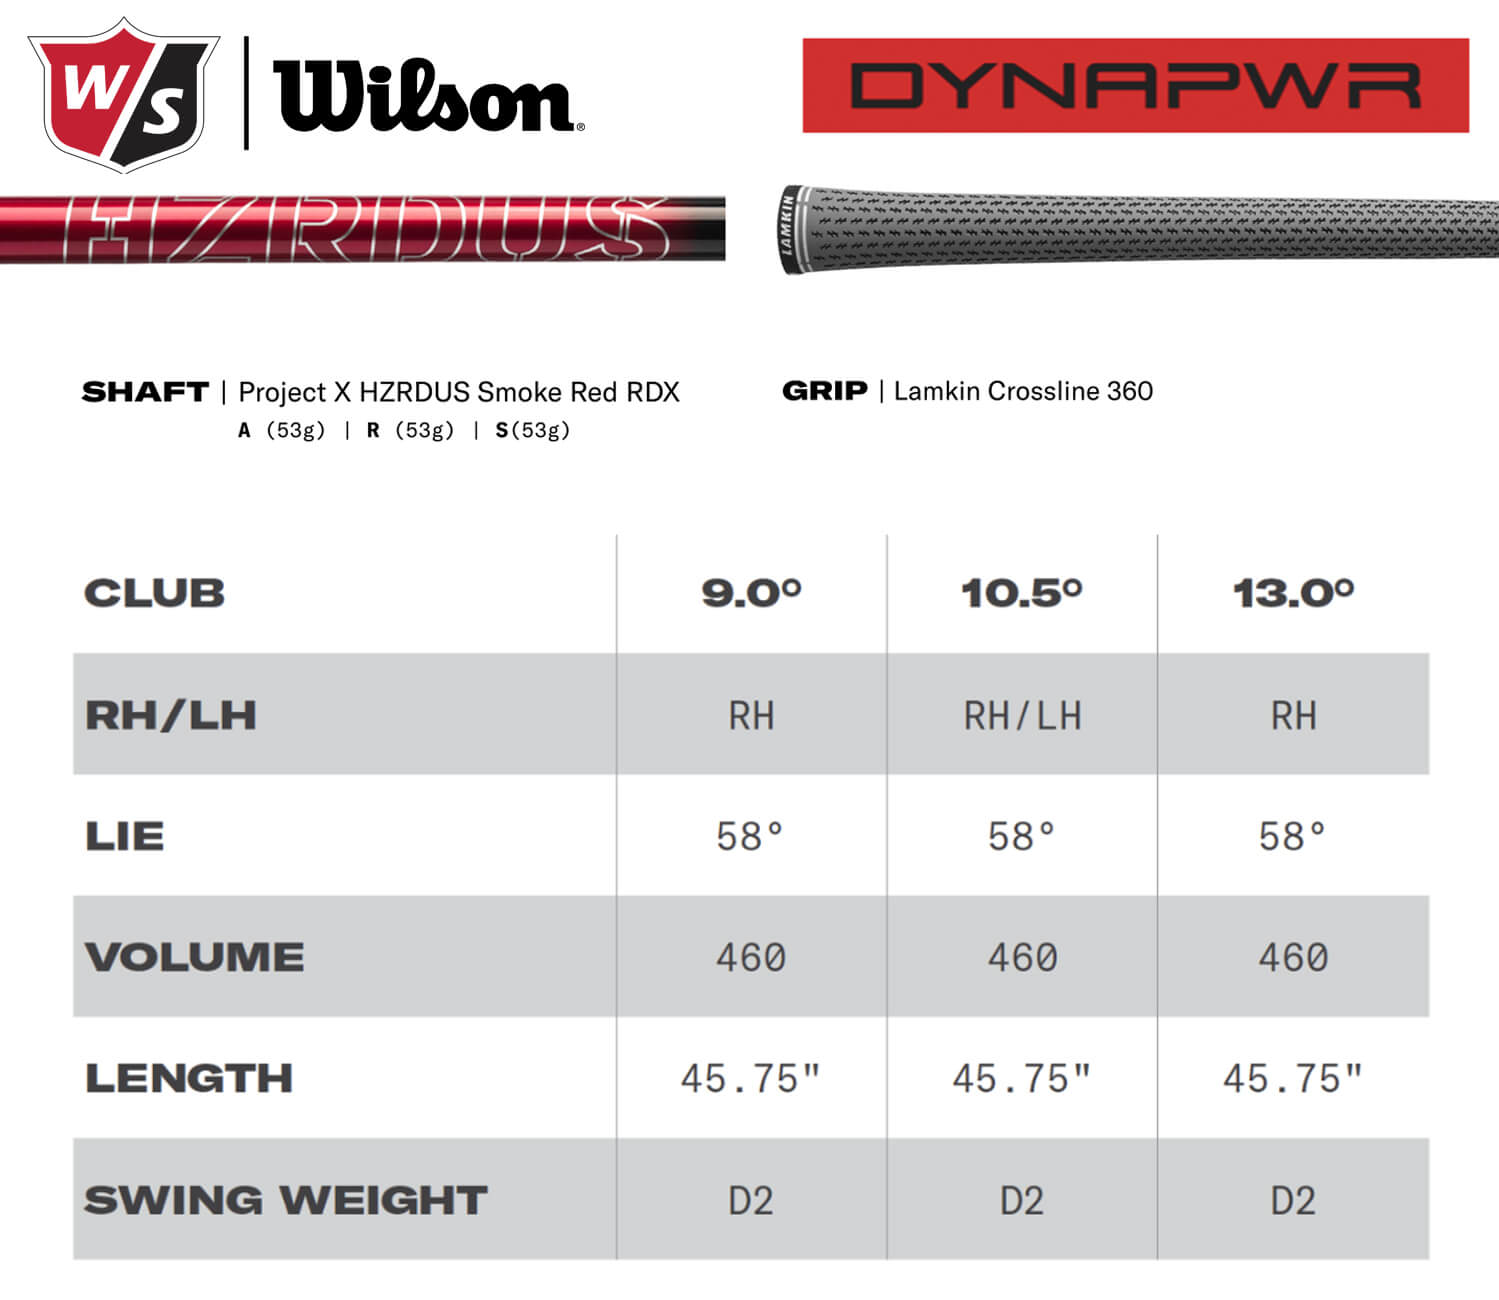 Specification for Wilson Dynapower Titanium Golf Driver